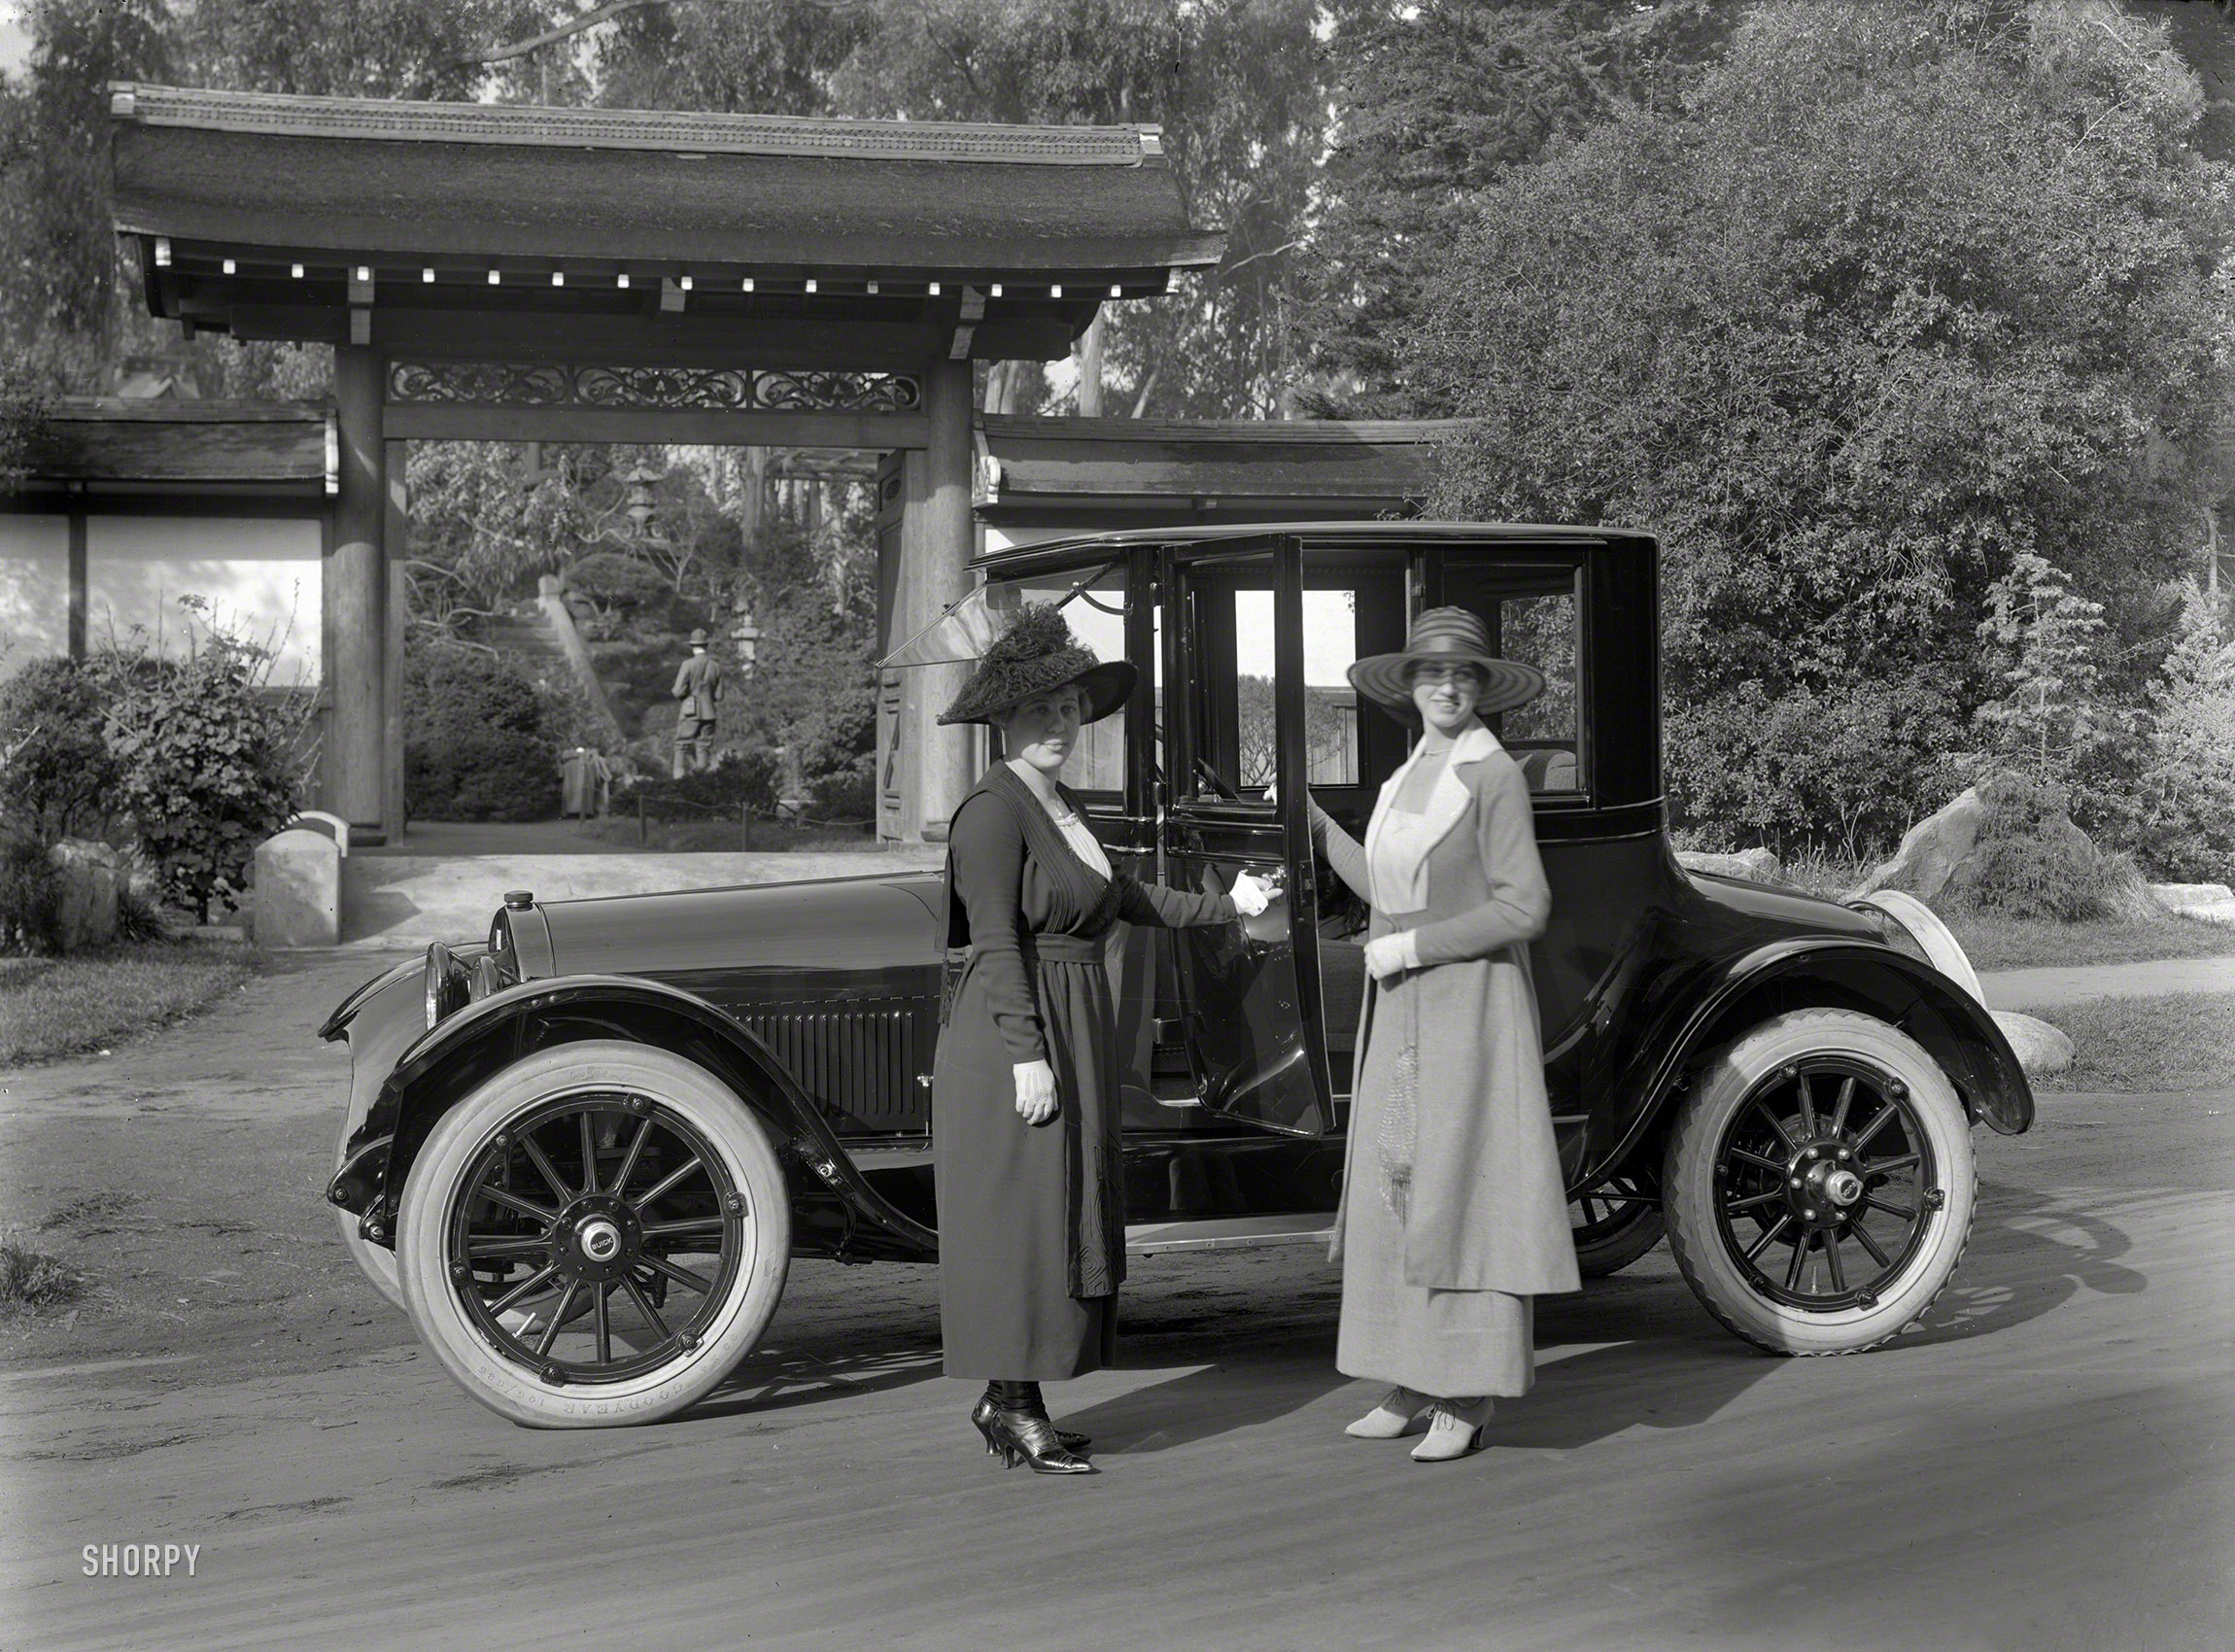 San Francisco. 1918. "Buick at Japanese Tea Garden, Golden Gate Park." Domina&shy;trix footwear on the left. 5x7 glass negative by Christopher Helin. View full size.